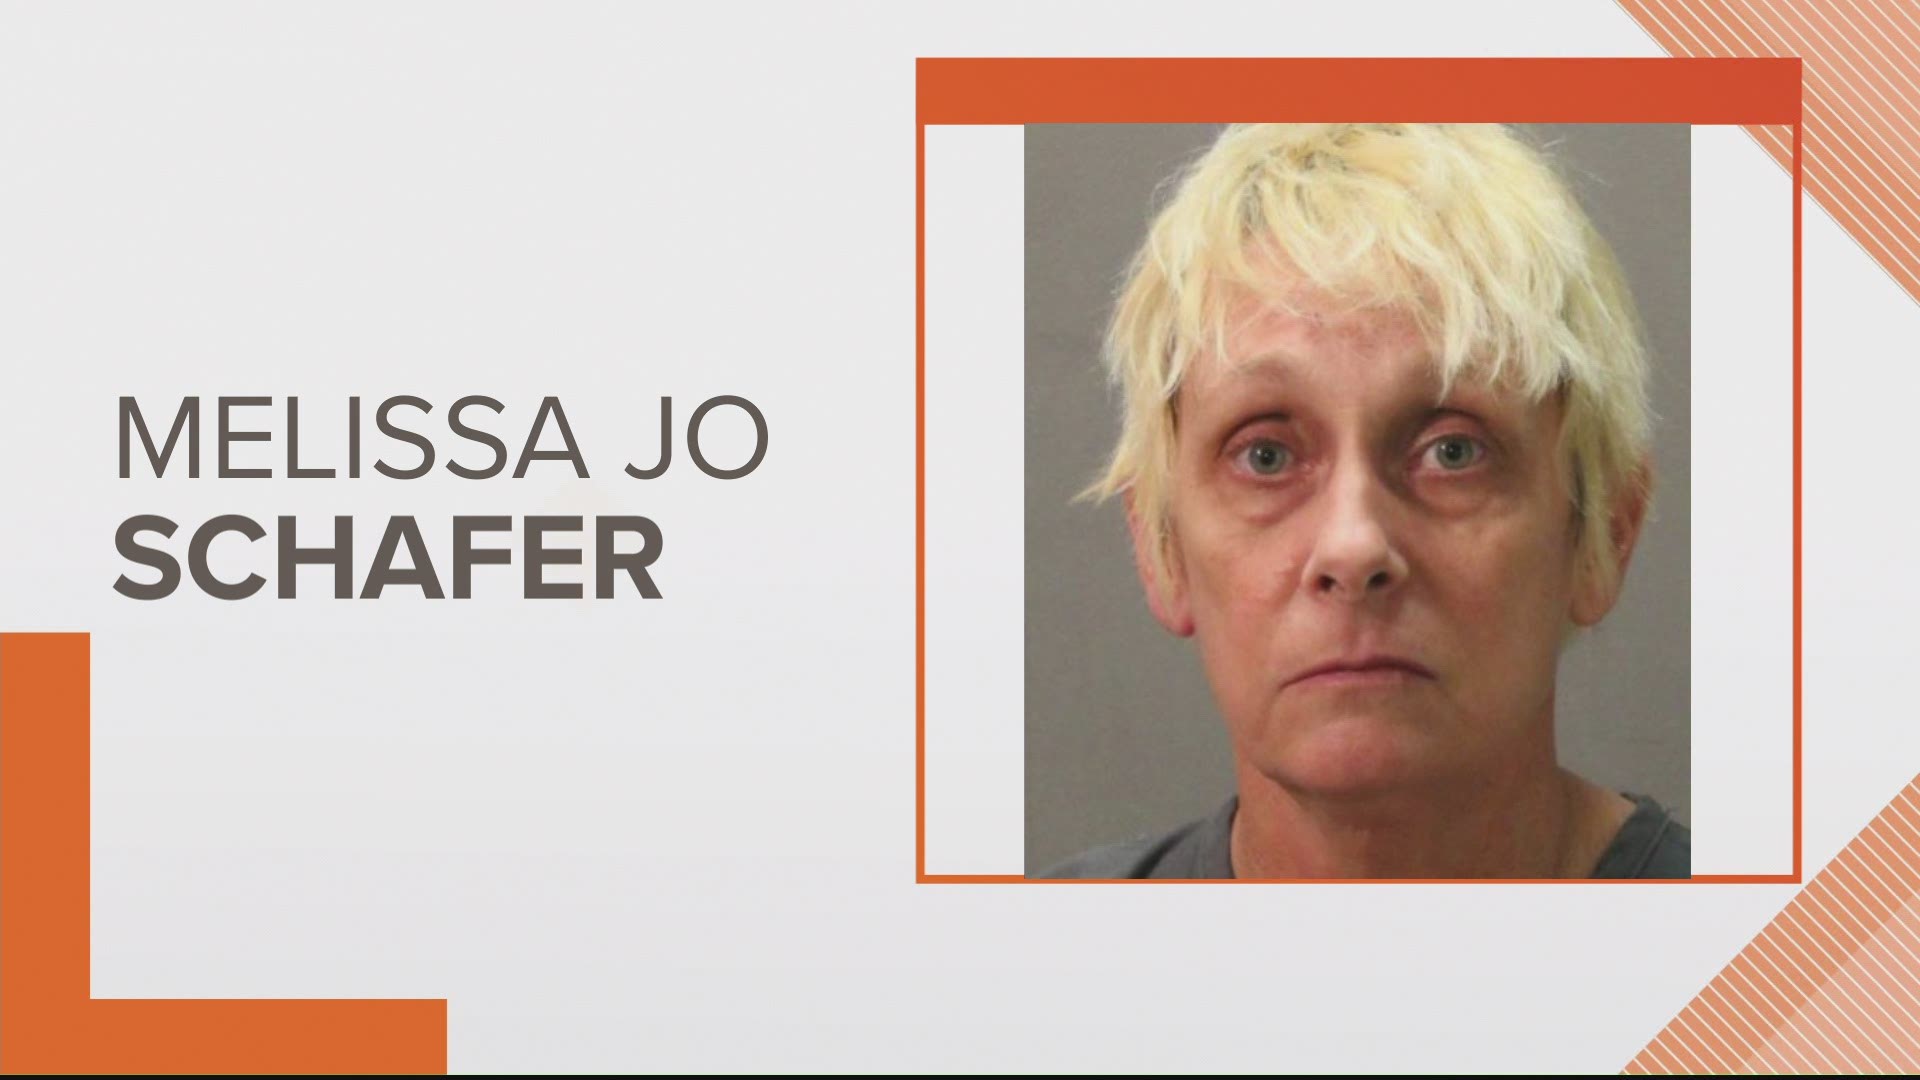 Law enforcement sources tell First Coast News Melissa Jo Schafer is expected to testify against her ex-husband and former JSO detective in the murder of Saad Kawaf.